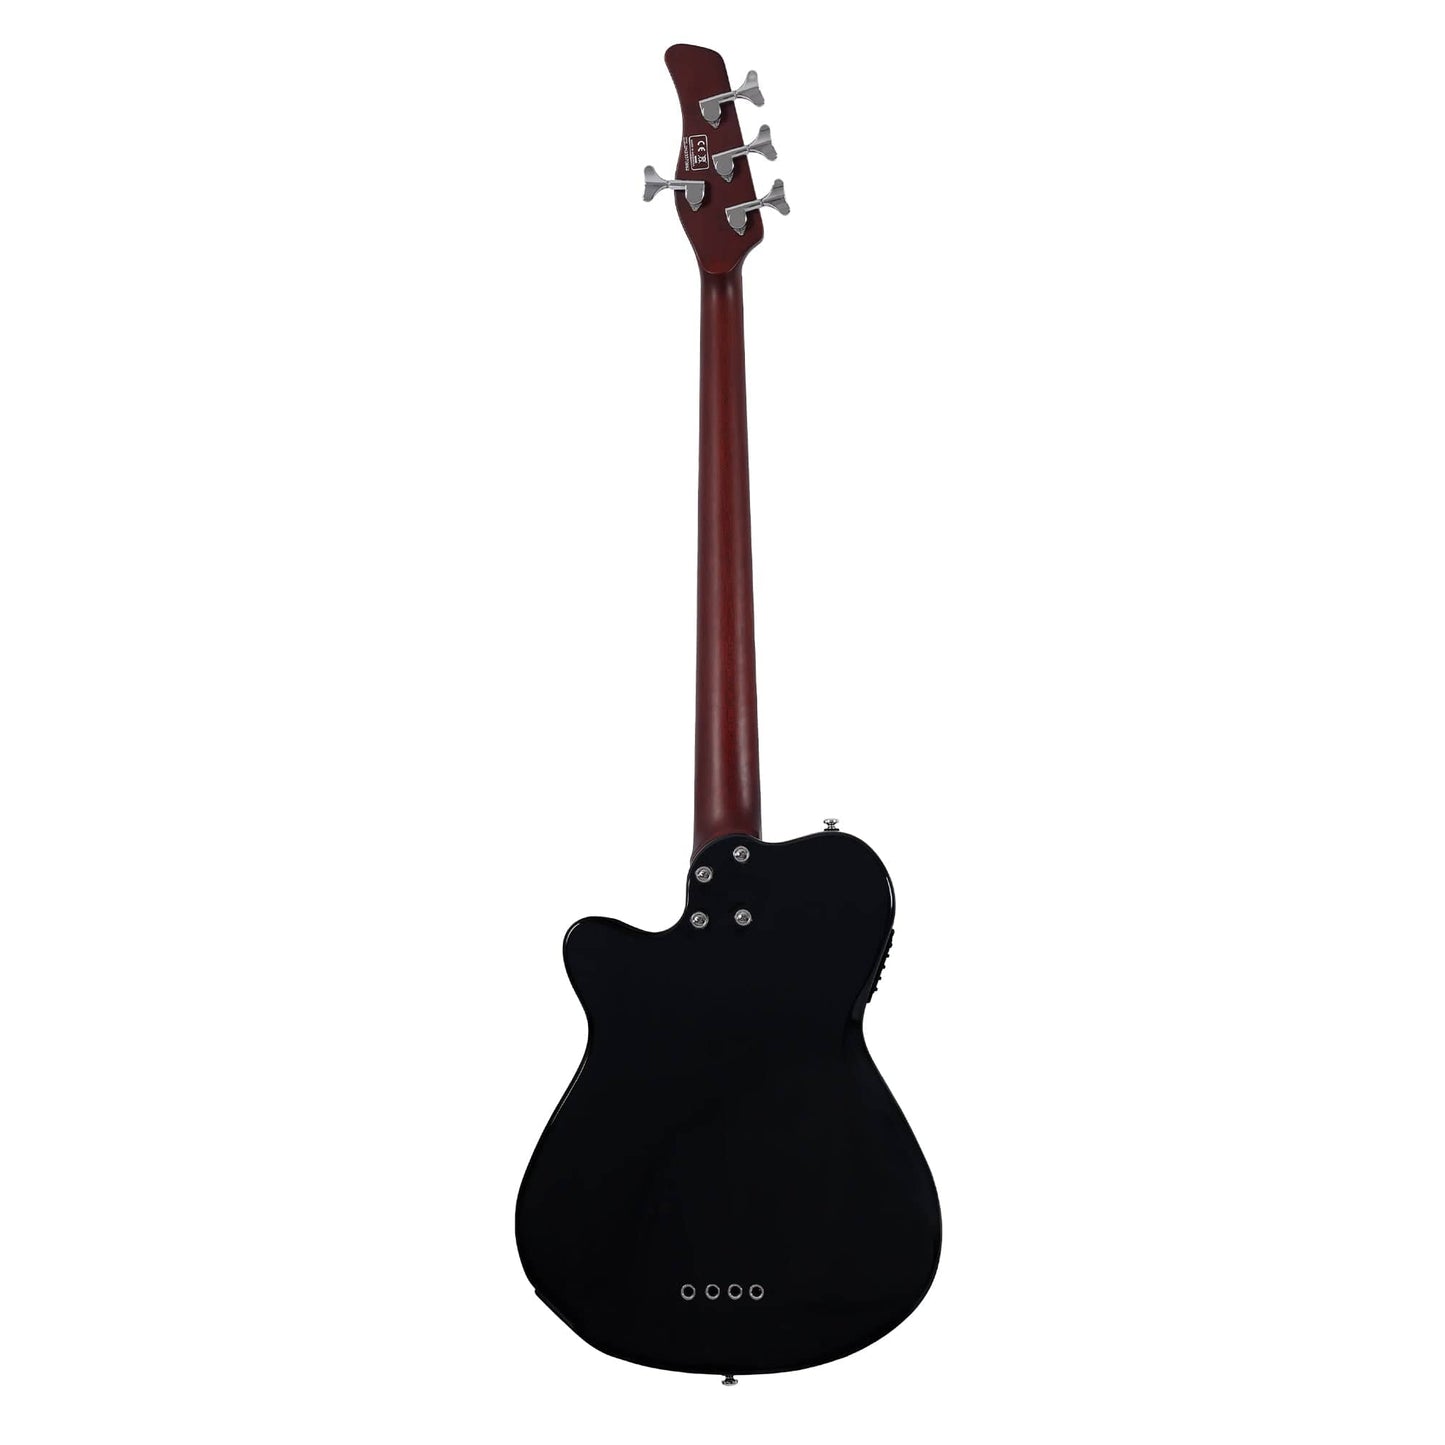 Sire Marcus Miller GB5 4-String Acoustic Bass Black Bass Guitars / 4-String